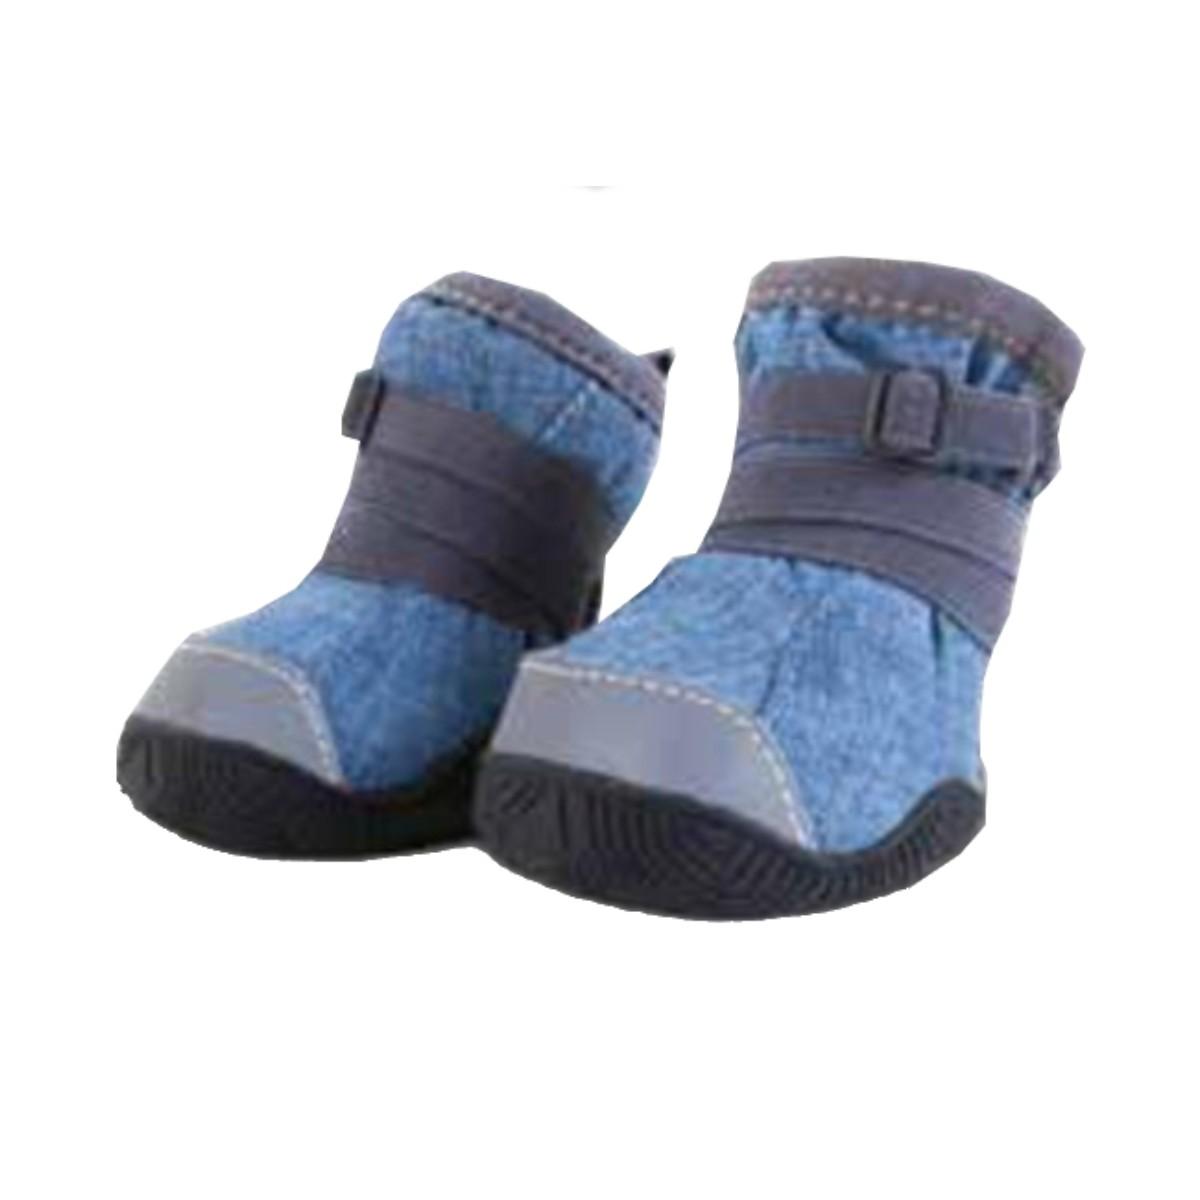 Hurtta Expedition Dog Boots - Bilberry 